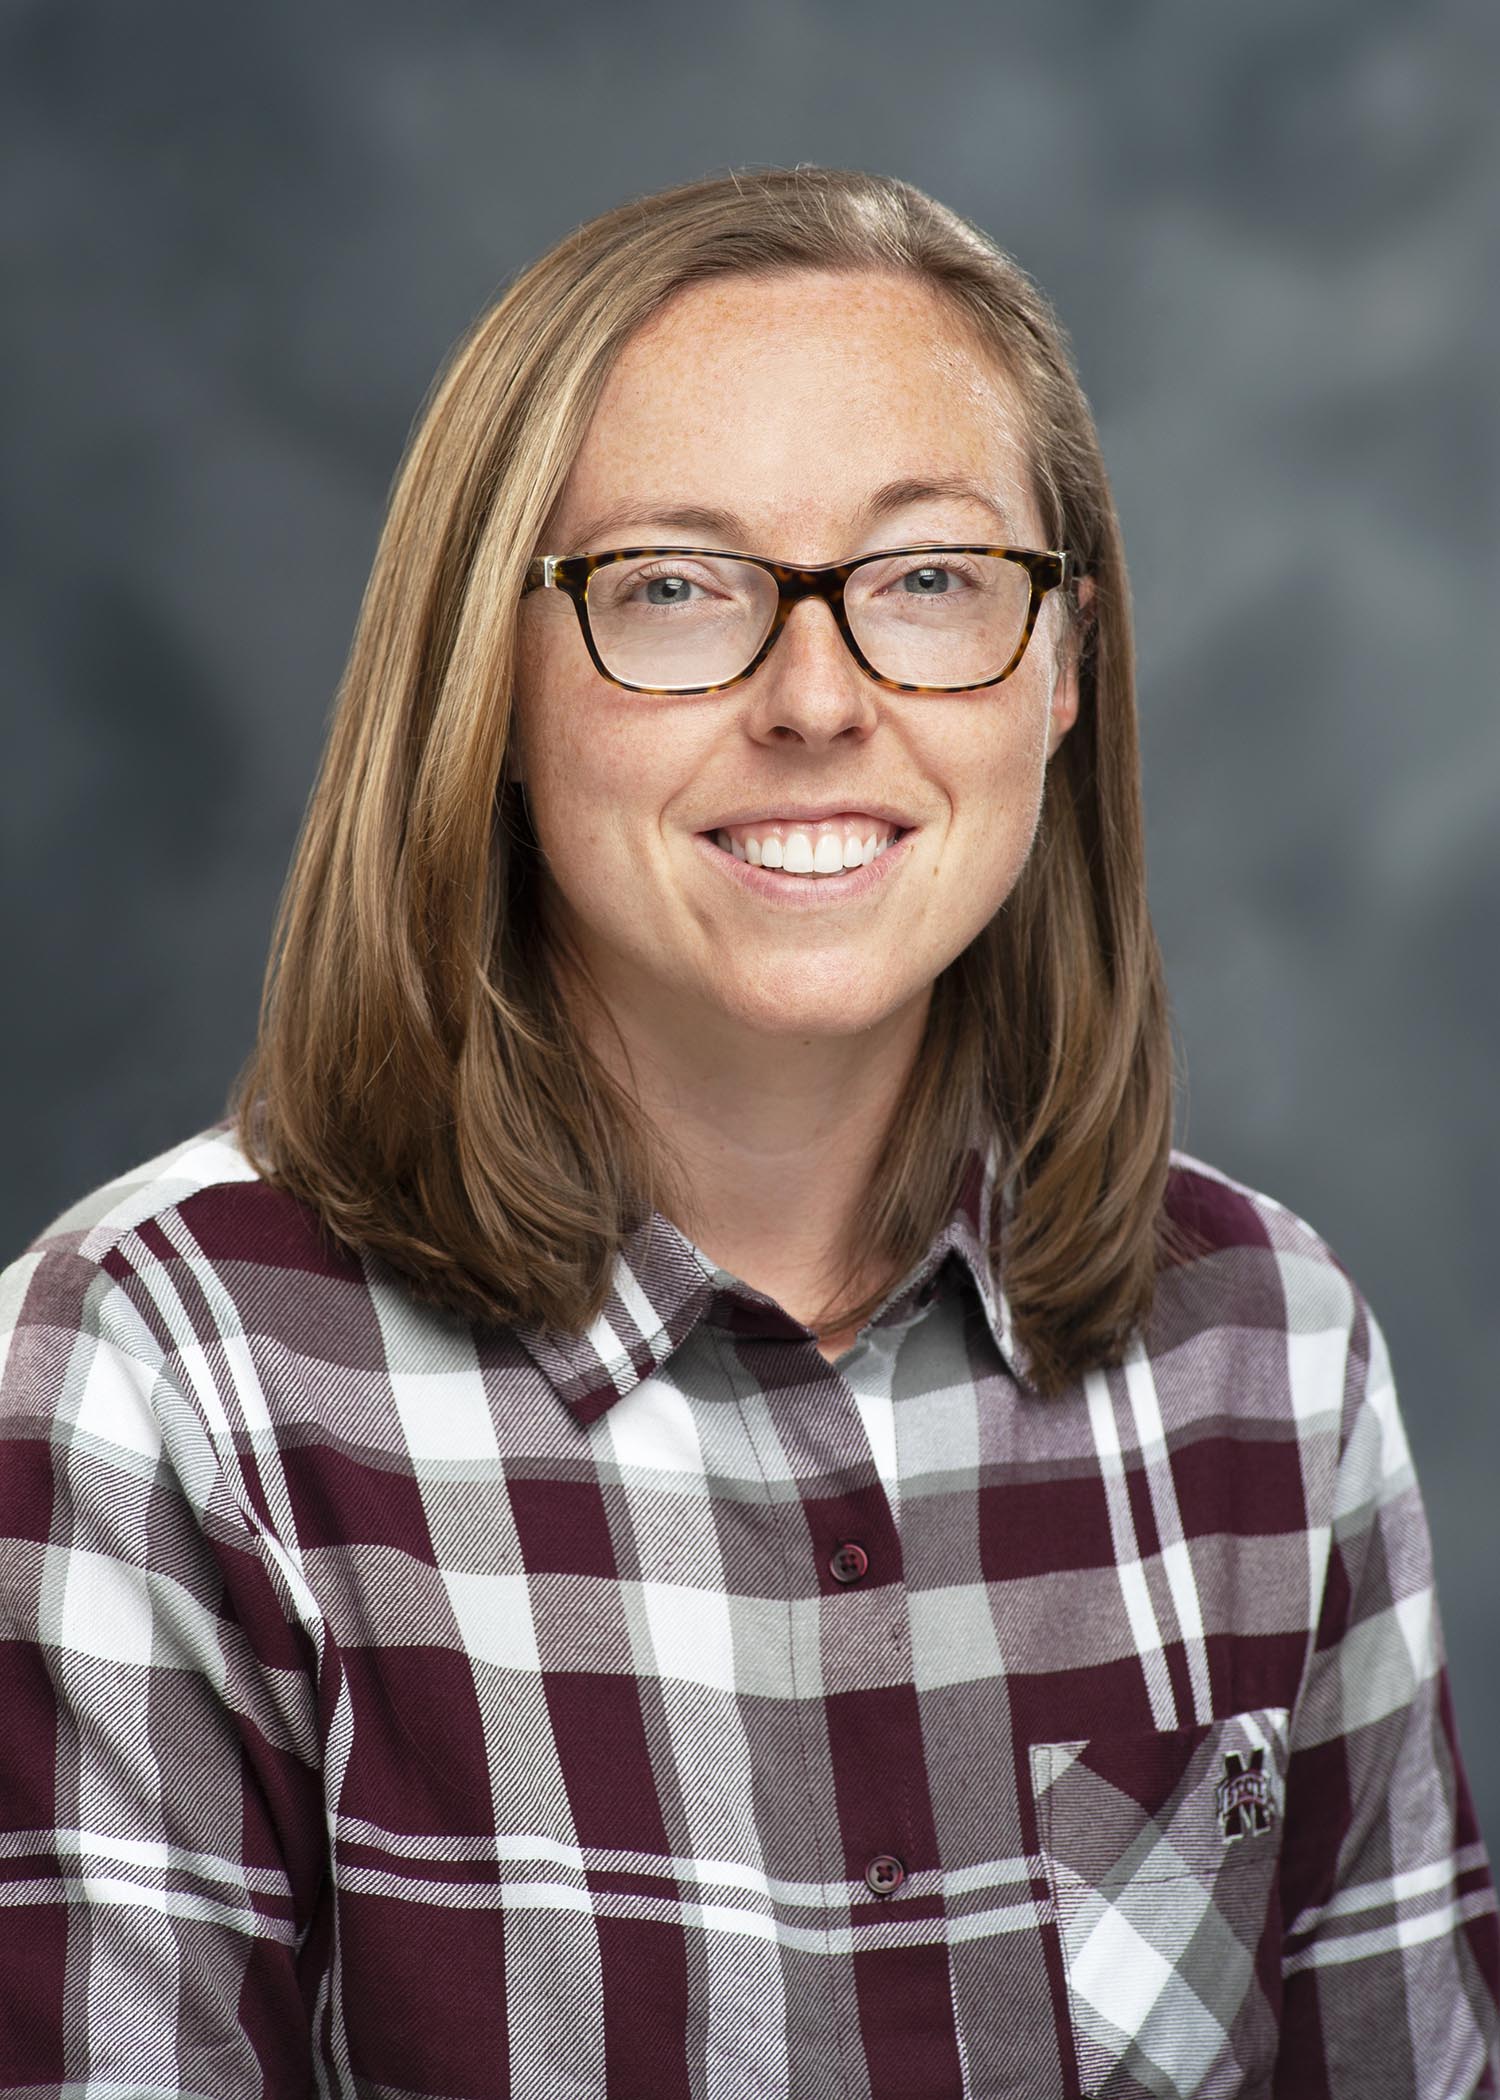 Professional photo of Kelsey Crane, wearing a maroon/white shirt against a gray background.